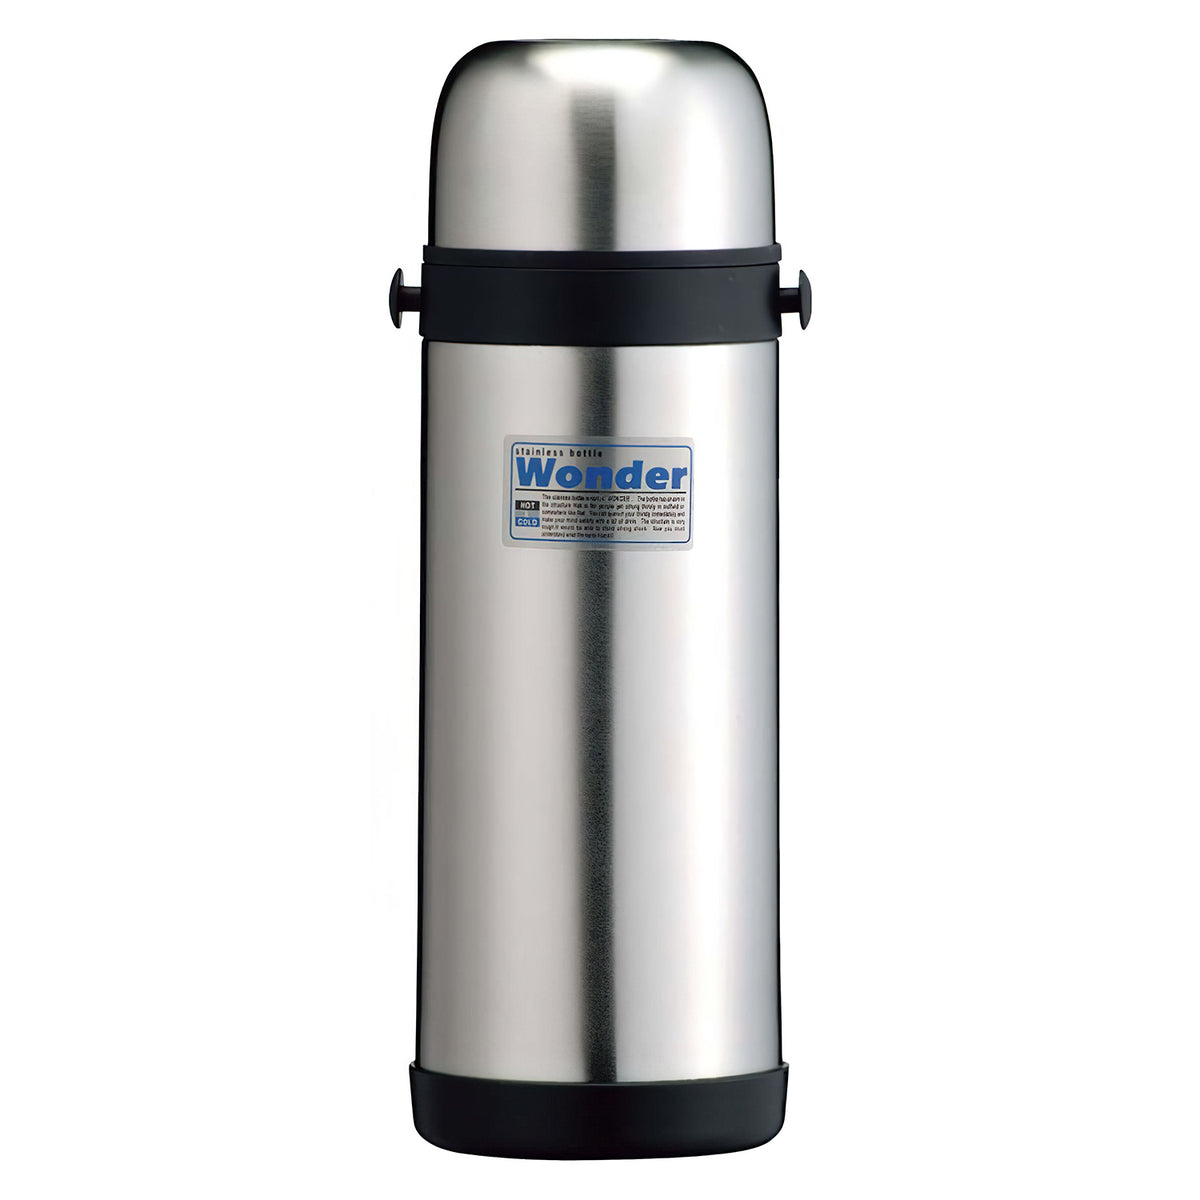 TIGER Non-Electric Stainless Steel Thermal Air Pot Beverage Dispenser -  Globalkitchen Japan